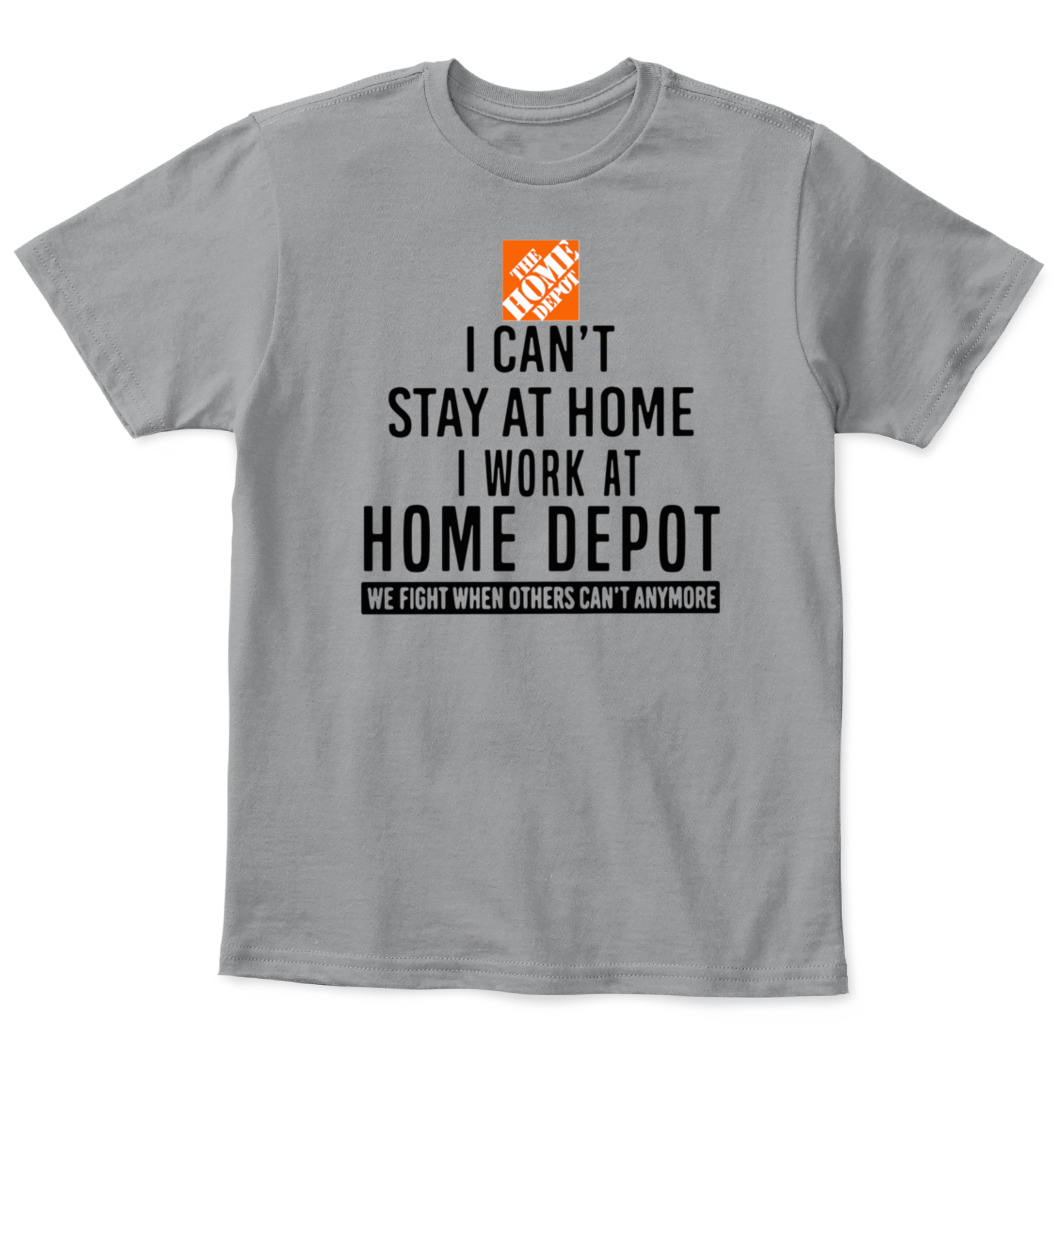 I CAN STAY AT HOME I WORK AT HOME DEPOT T-SHIRT - Ellie Shirt